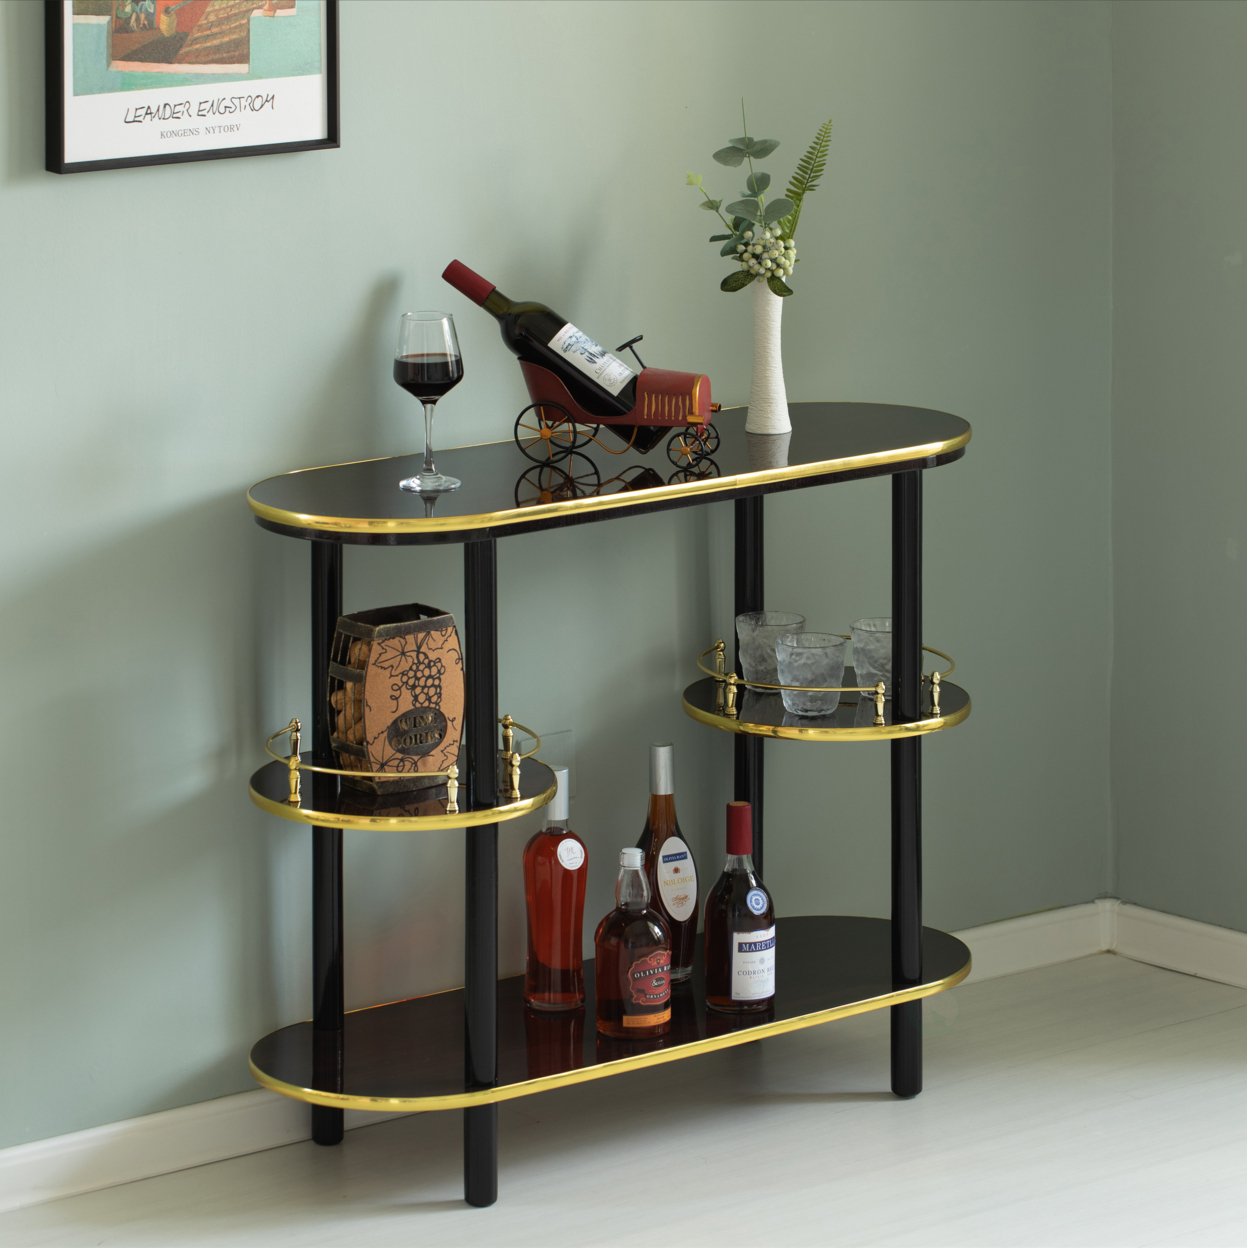 Modern Display Wooden Console Bar With Tiered Open Shelves, Mini Bar With Wine Storage - Brown